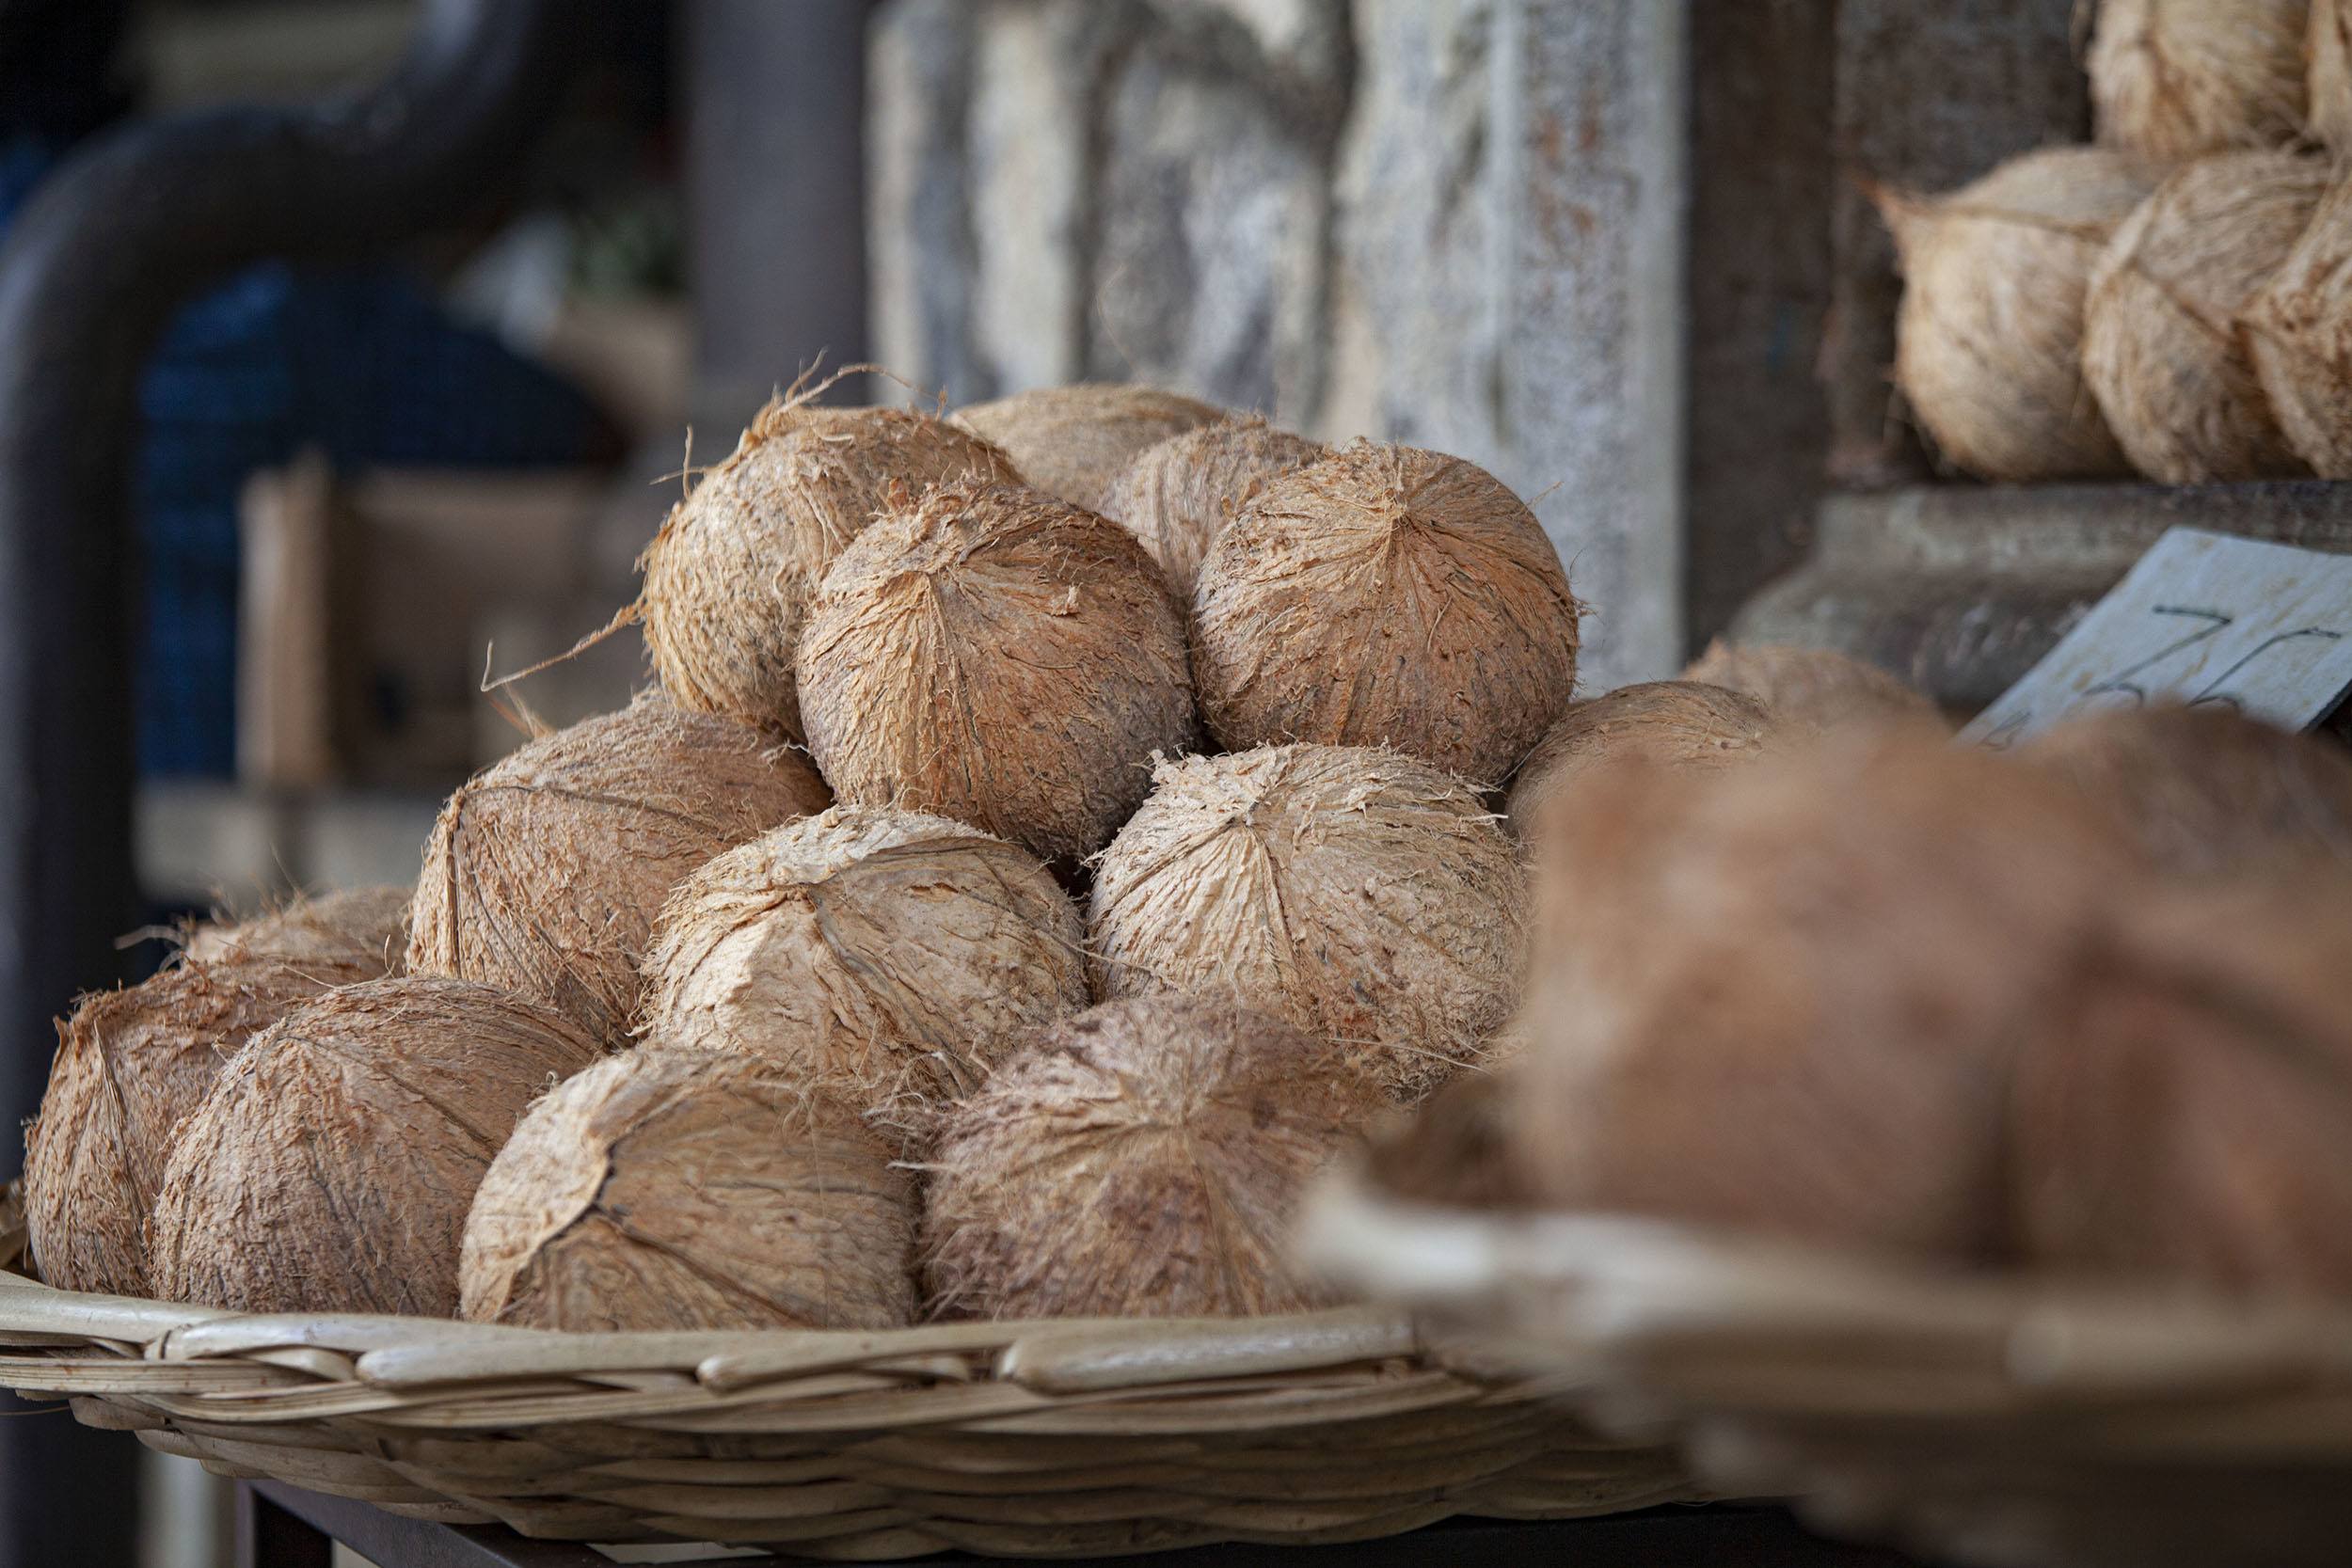 coconuts at central market in Port Louis Mauritius